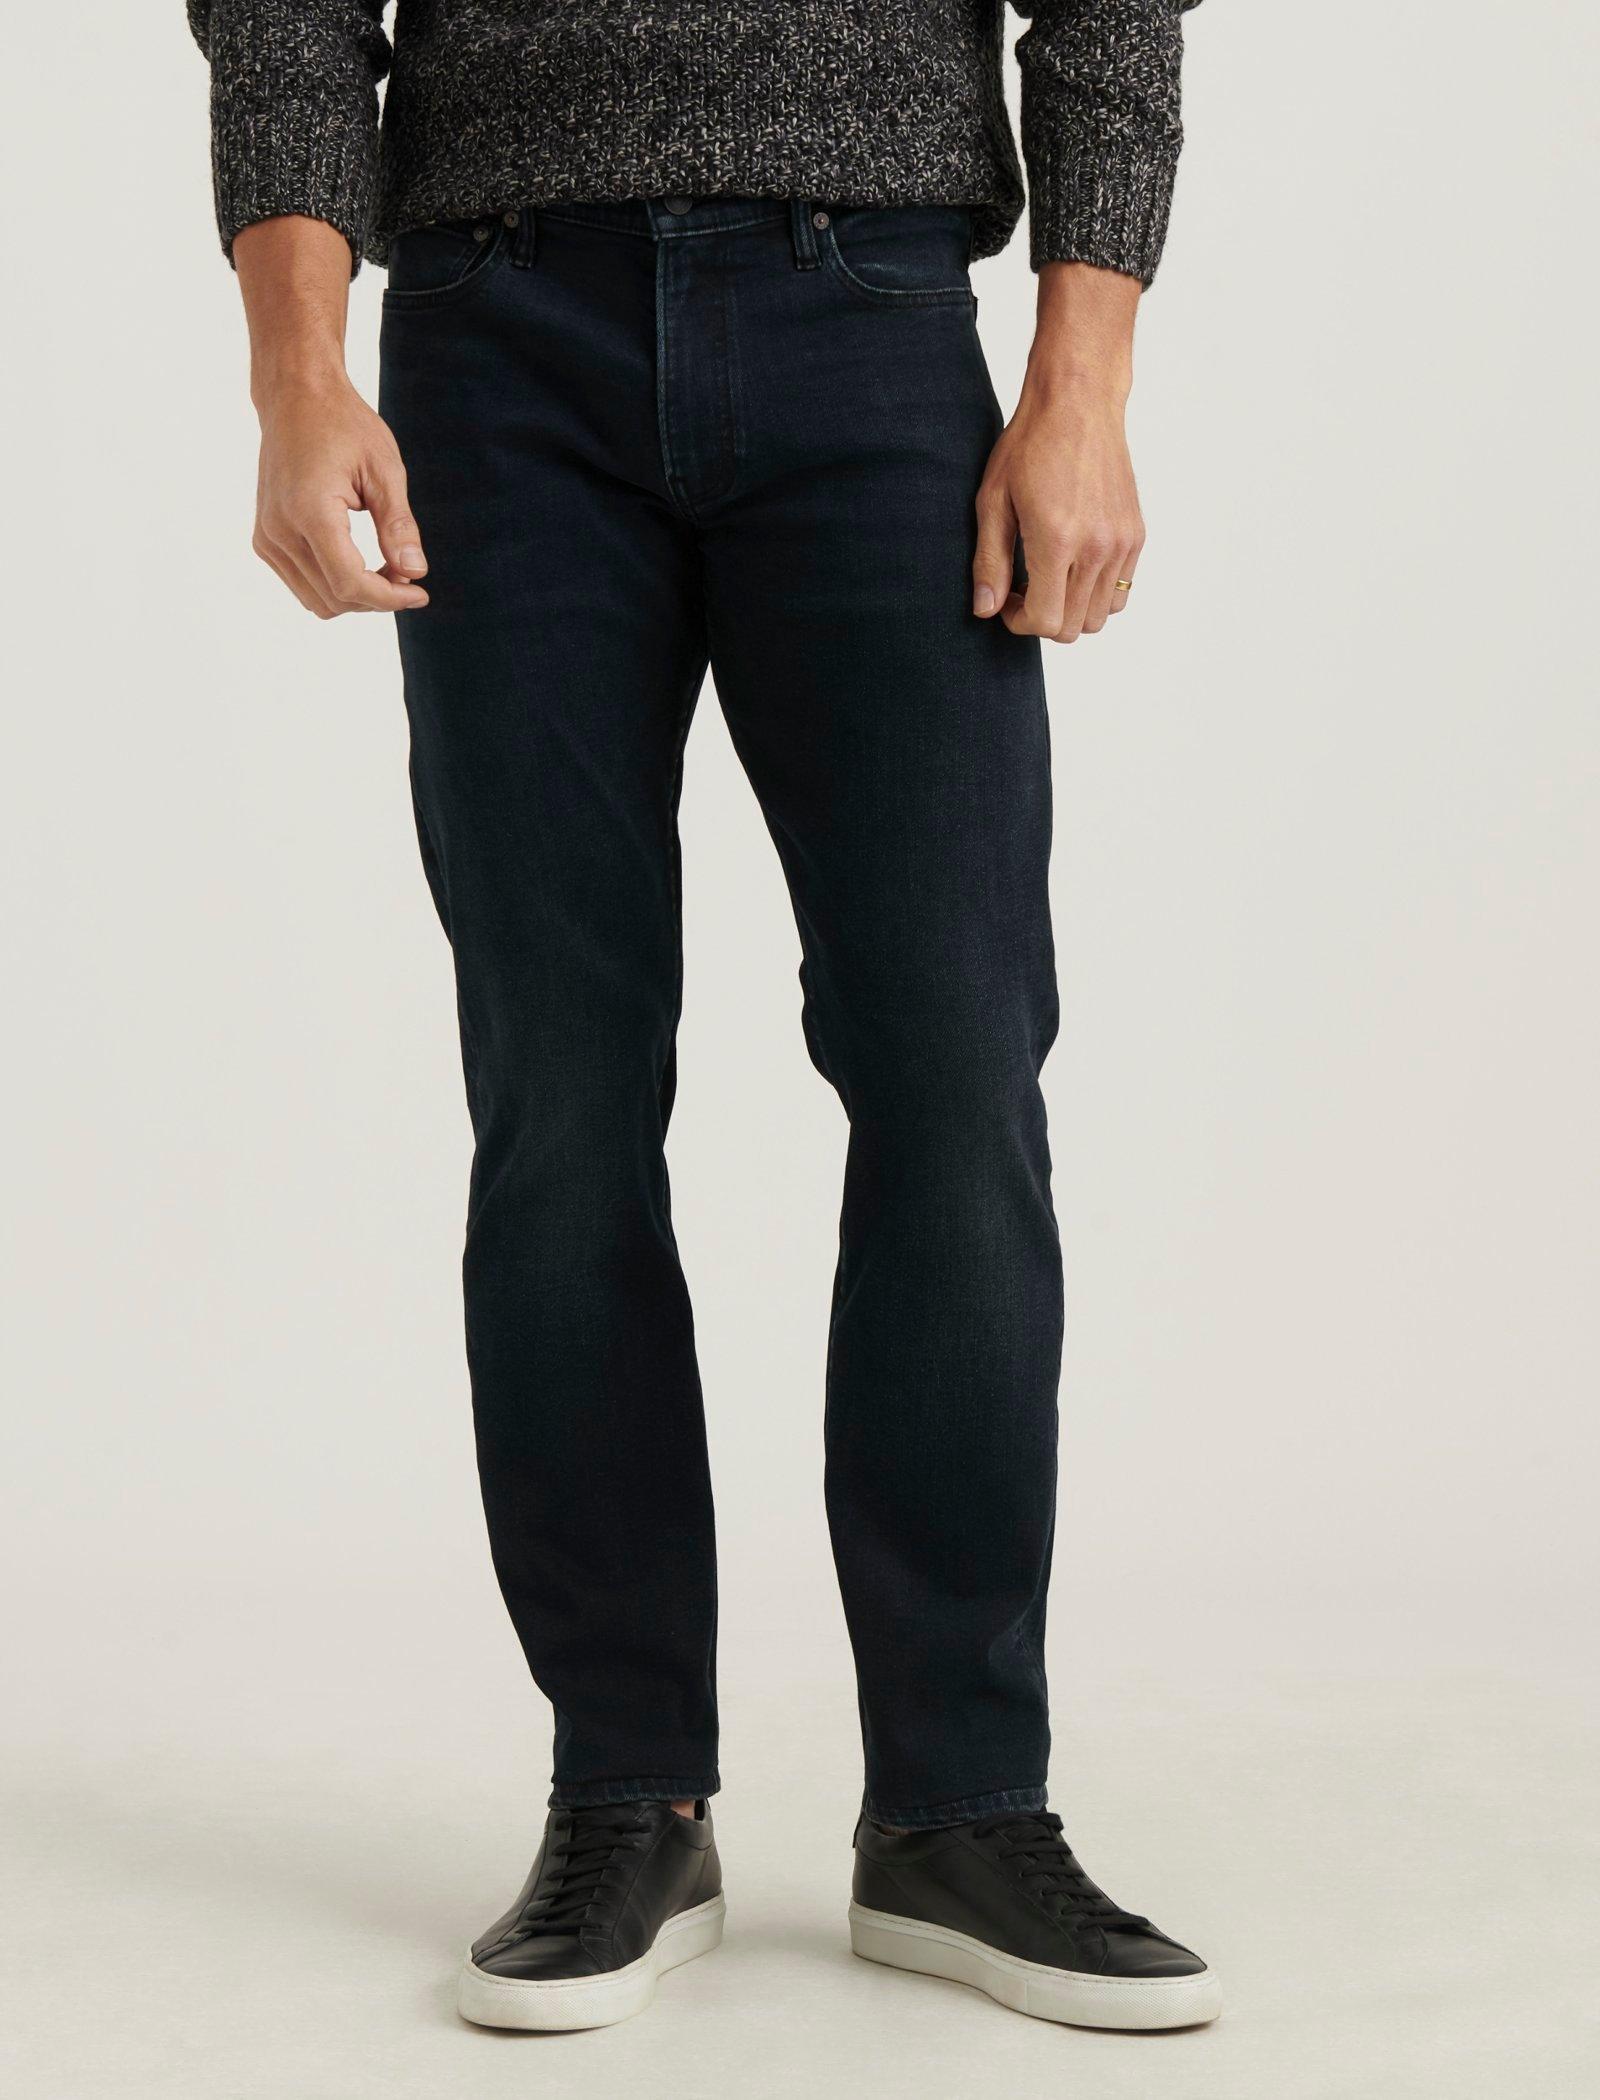 lucky brand 410 athletic fit chino